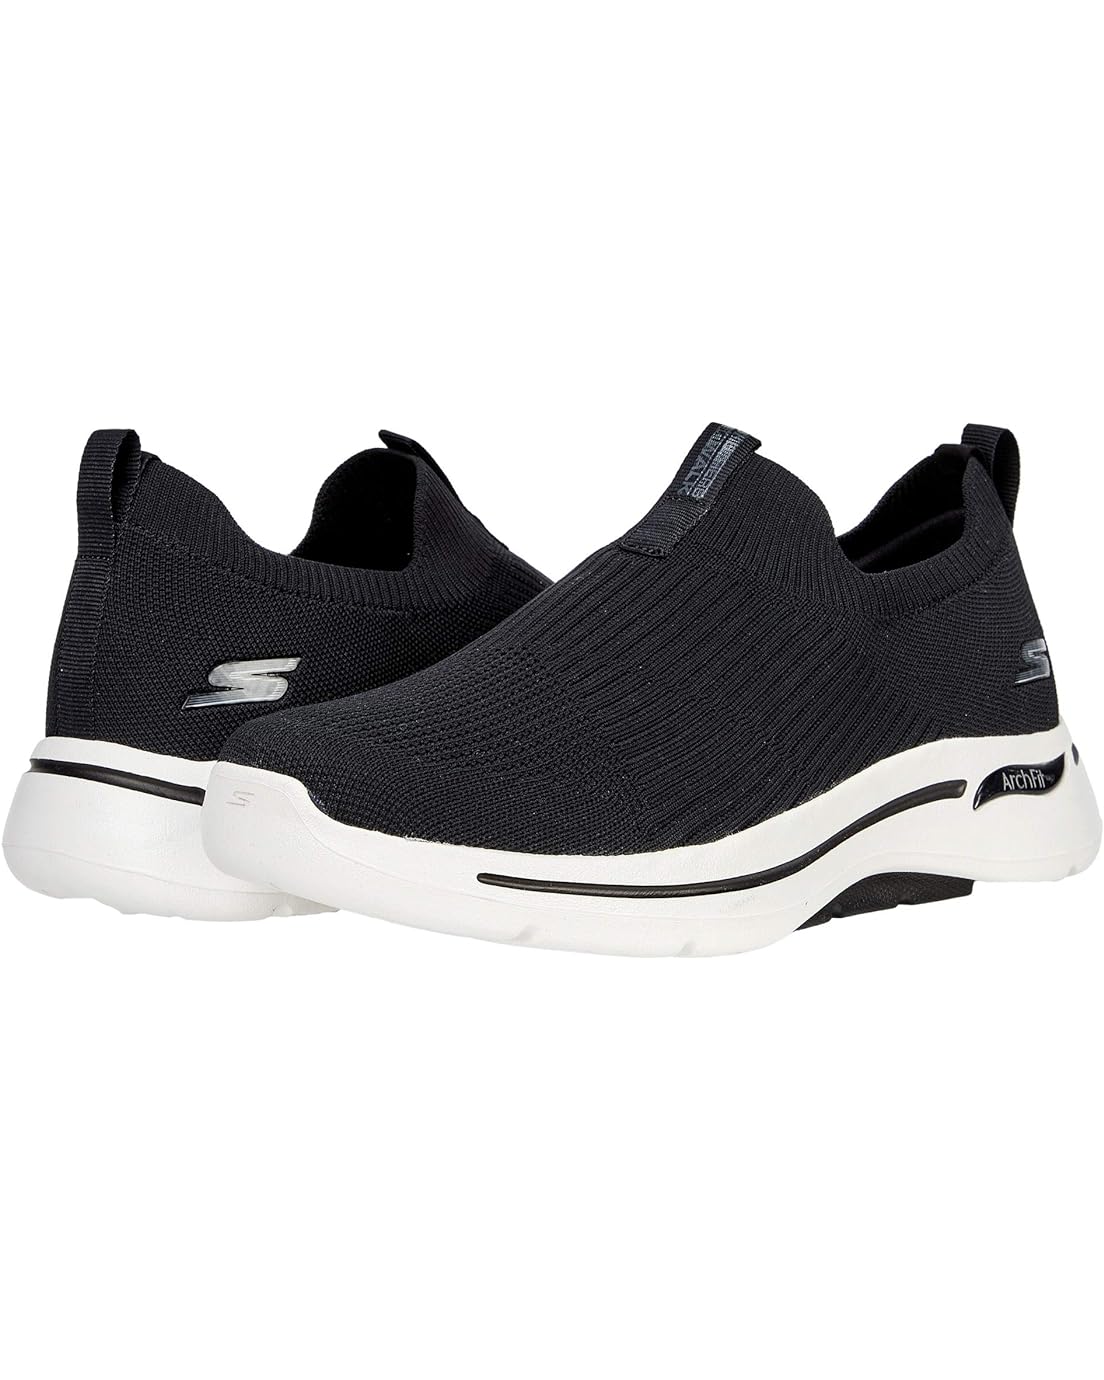 SKECHERS Performance Go Walk Arch Fit - Iconic